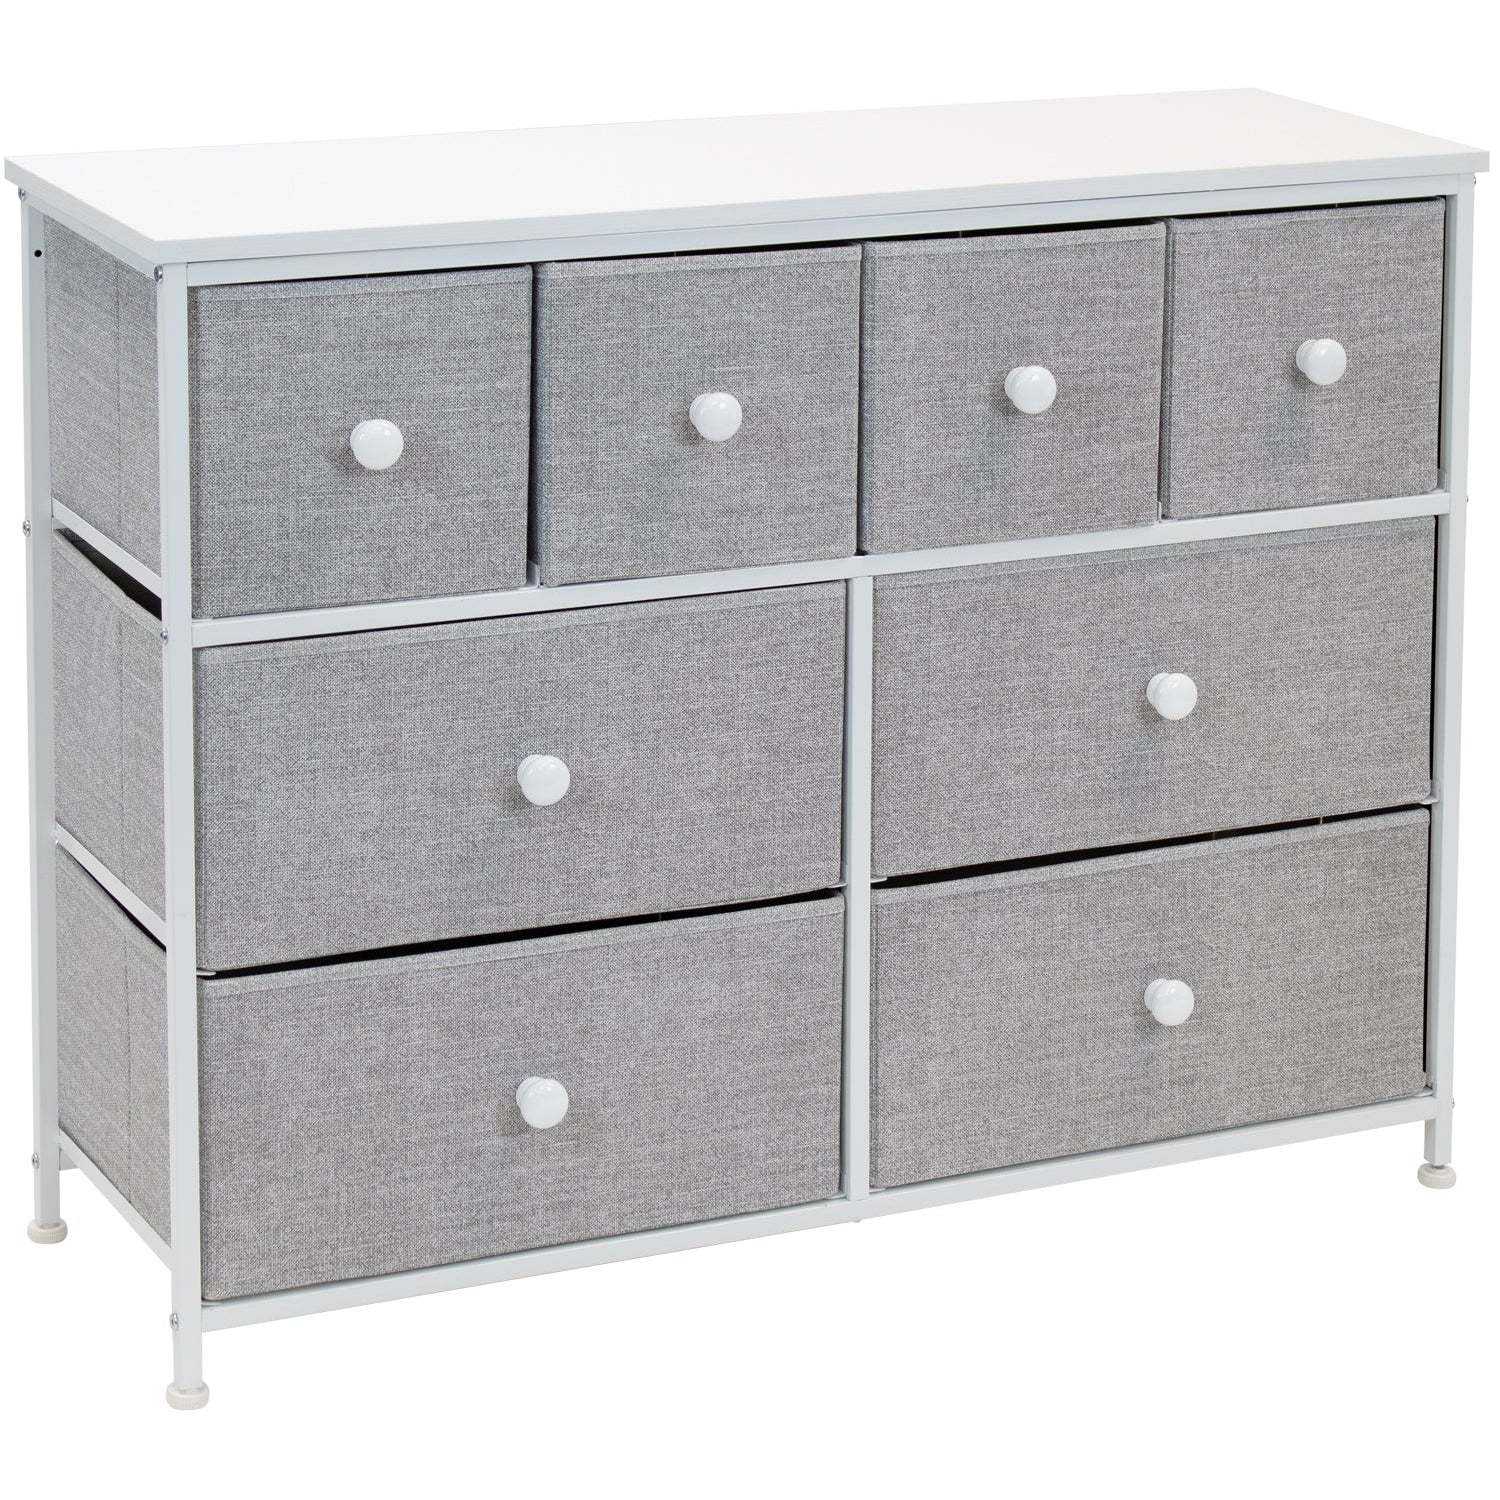 WLIVE Fabric Dresser for Bedroom, Storage Drawer Unit,Dresser with 10 Deep  Drawers for Office, College Dorm, White Organizer